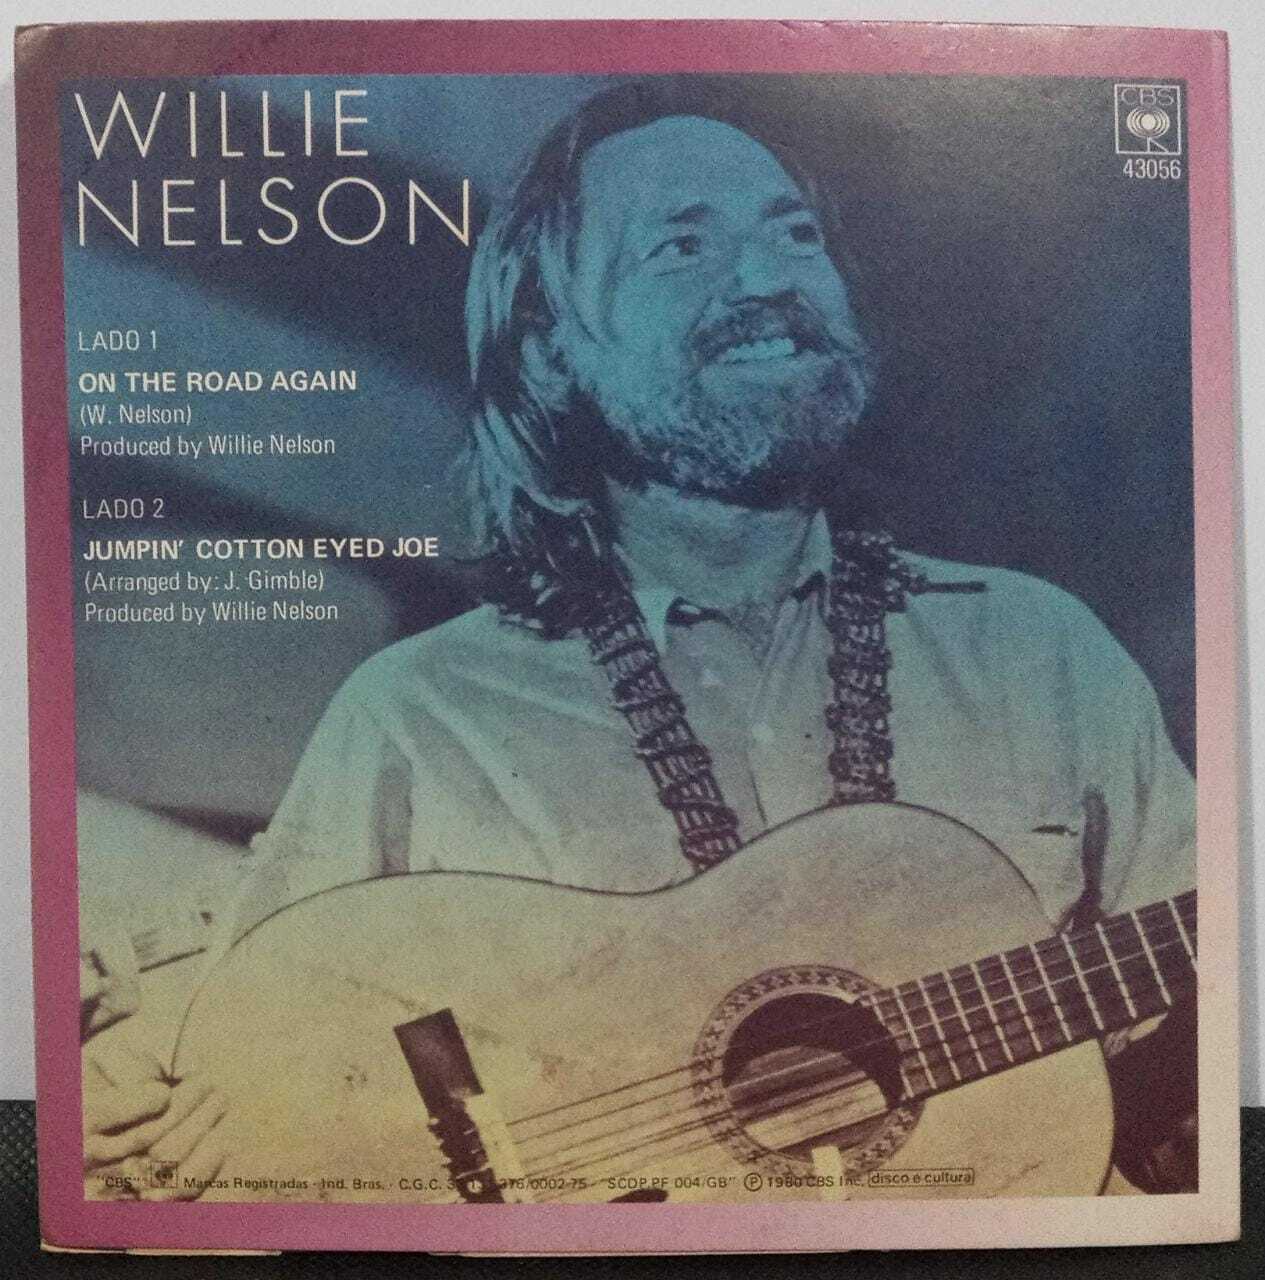 Vinil Compacto - Willie Nelson - On The Road Again